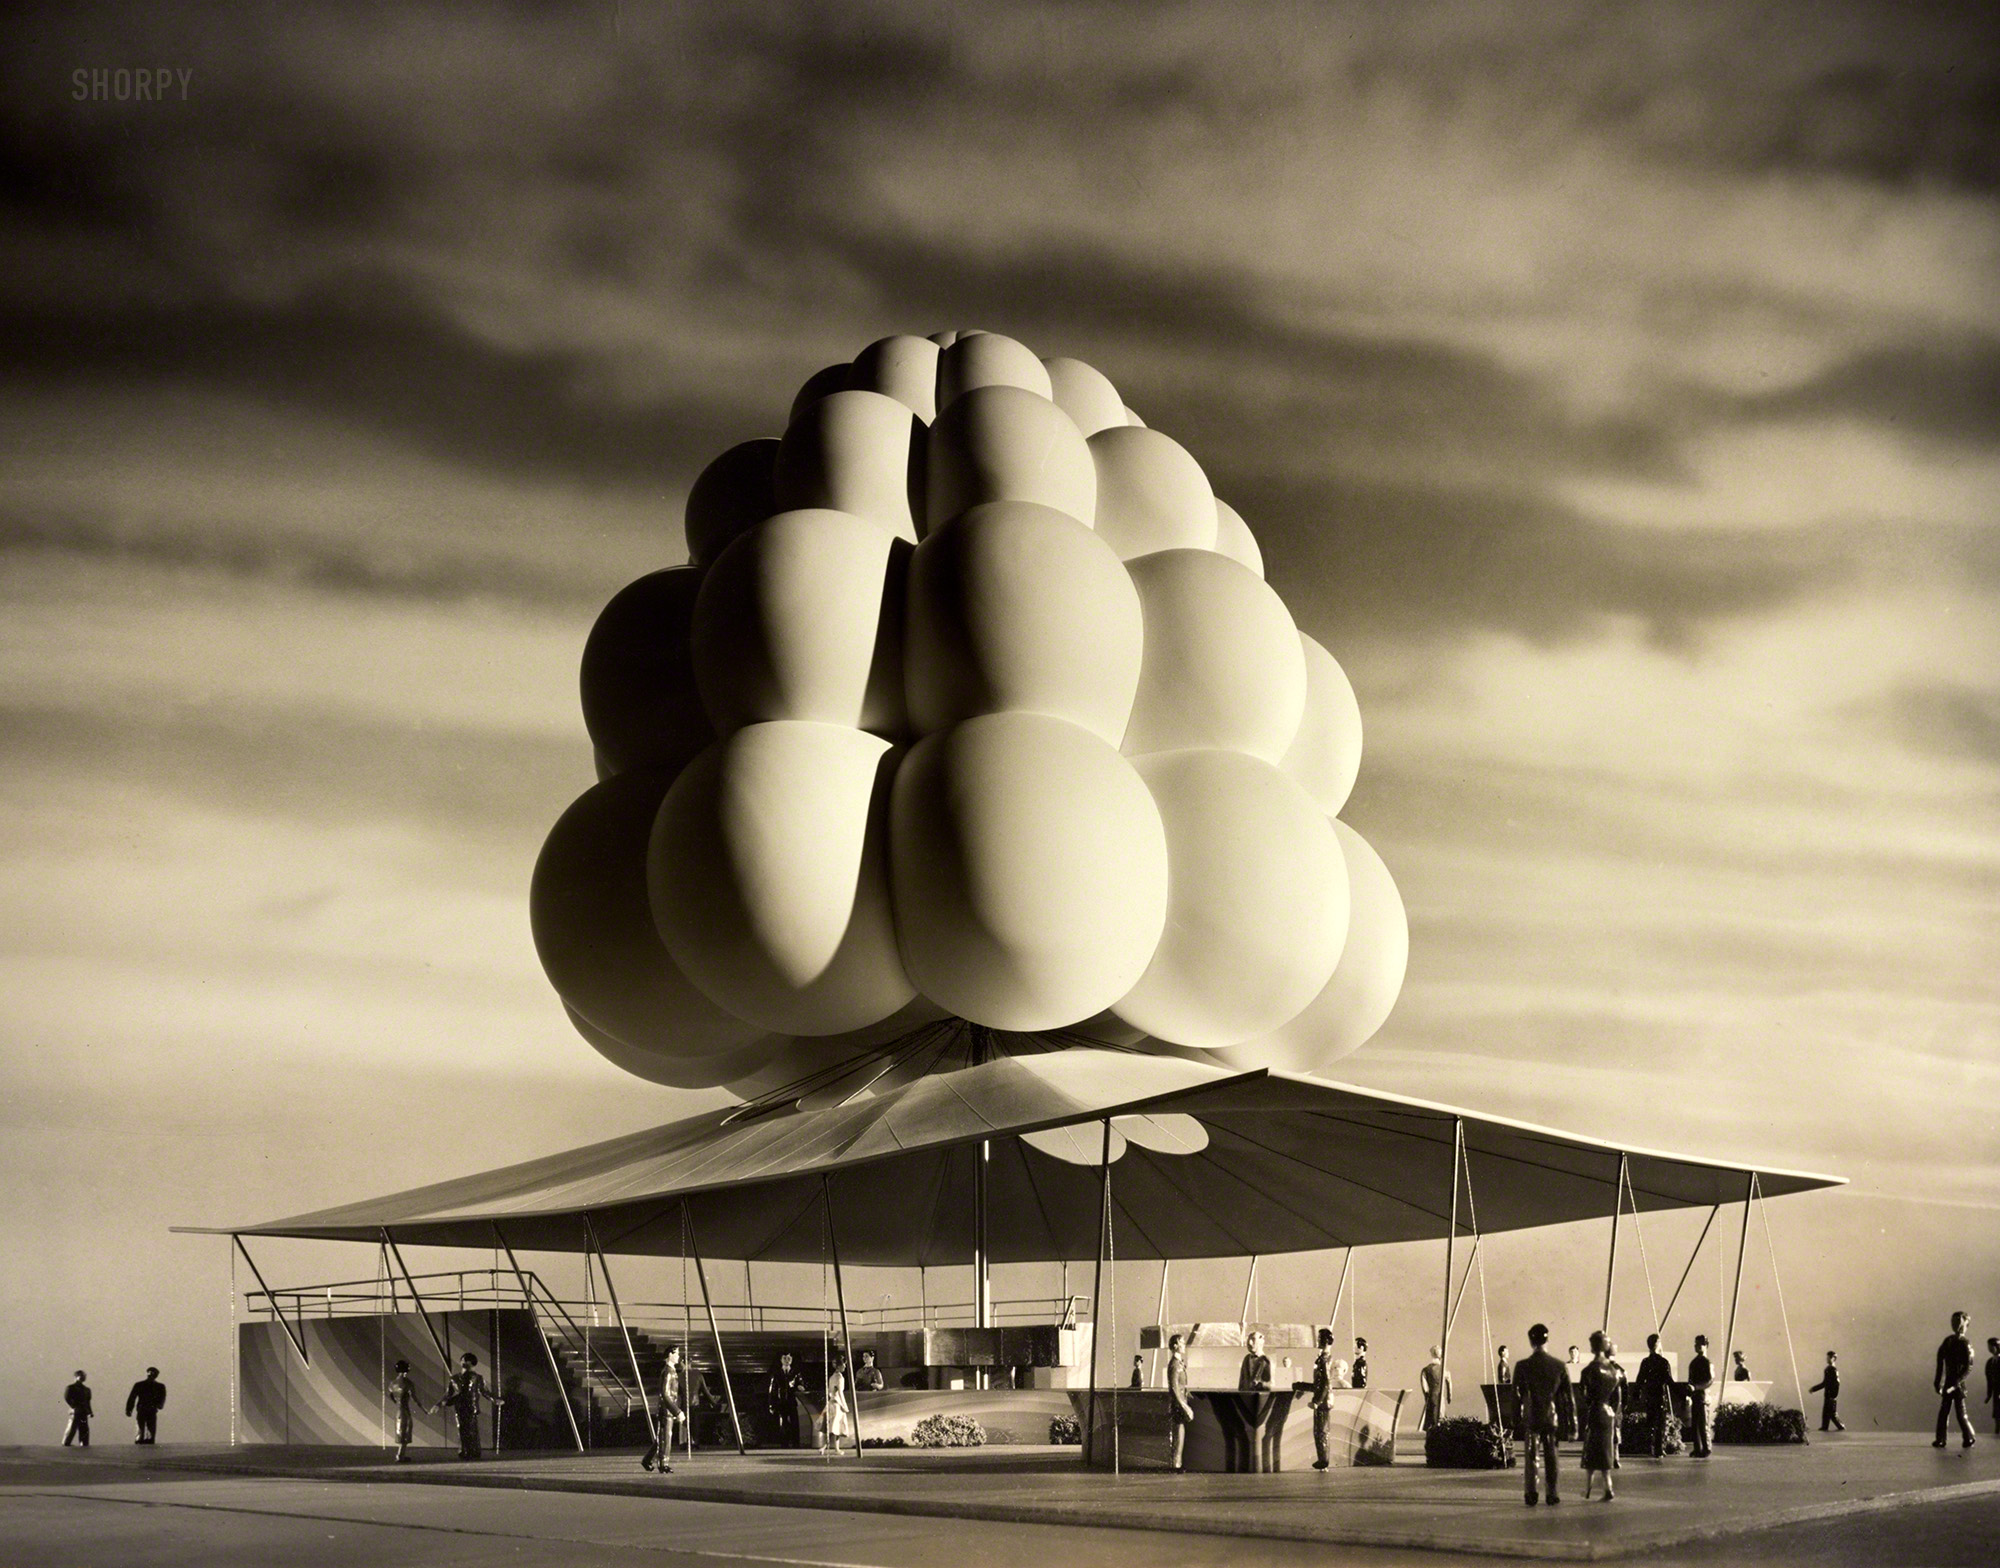 "Refreshment stand model, 1964-65 New York World's Fair, for the Brass Rail Food Service Organization. Victor Alfred Lundy, architect." View full size.